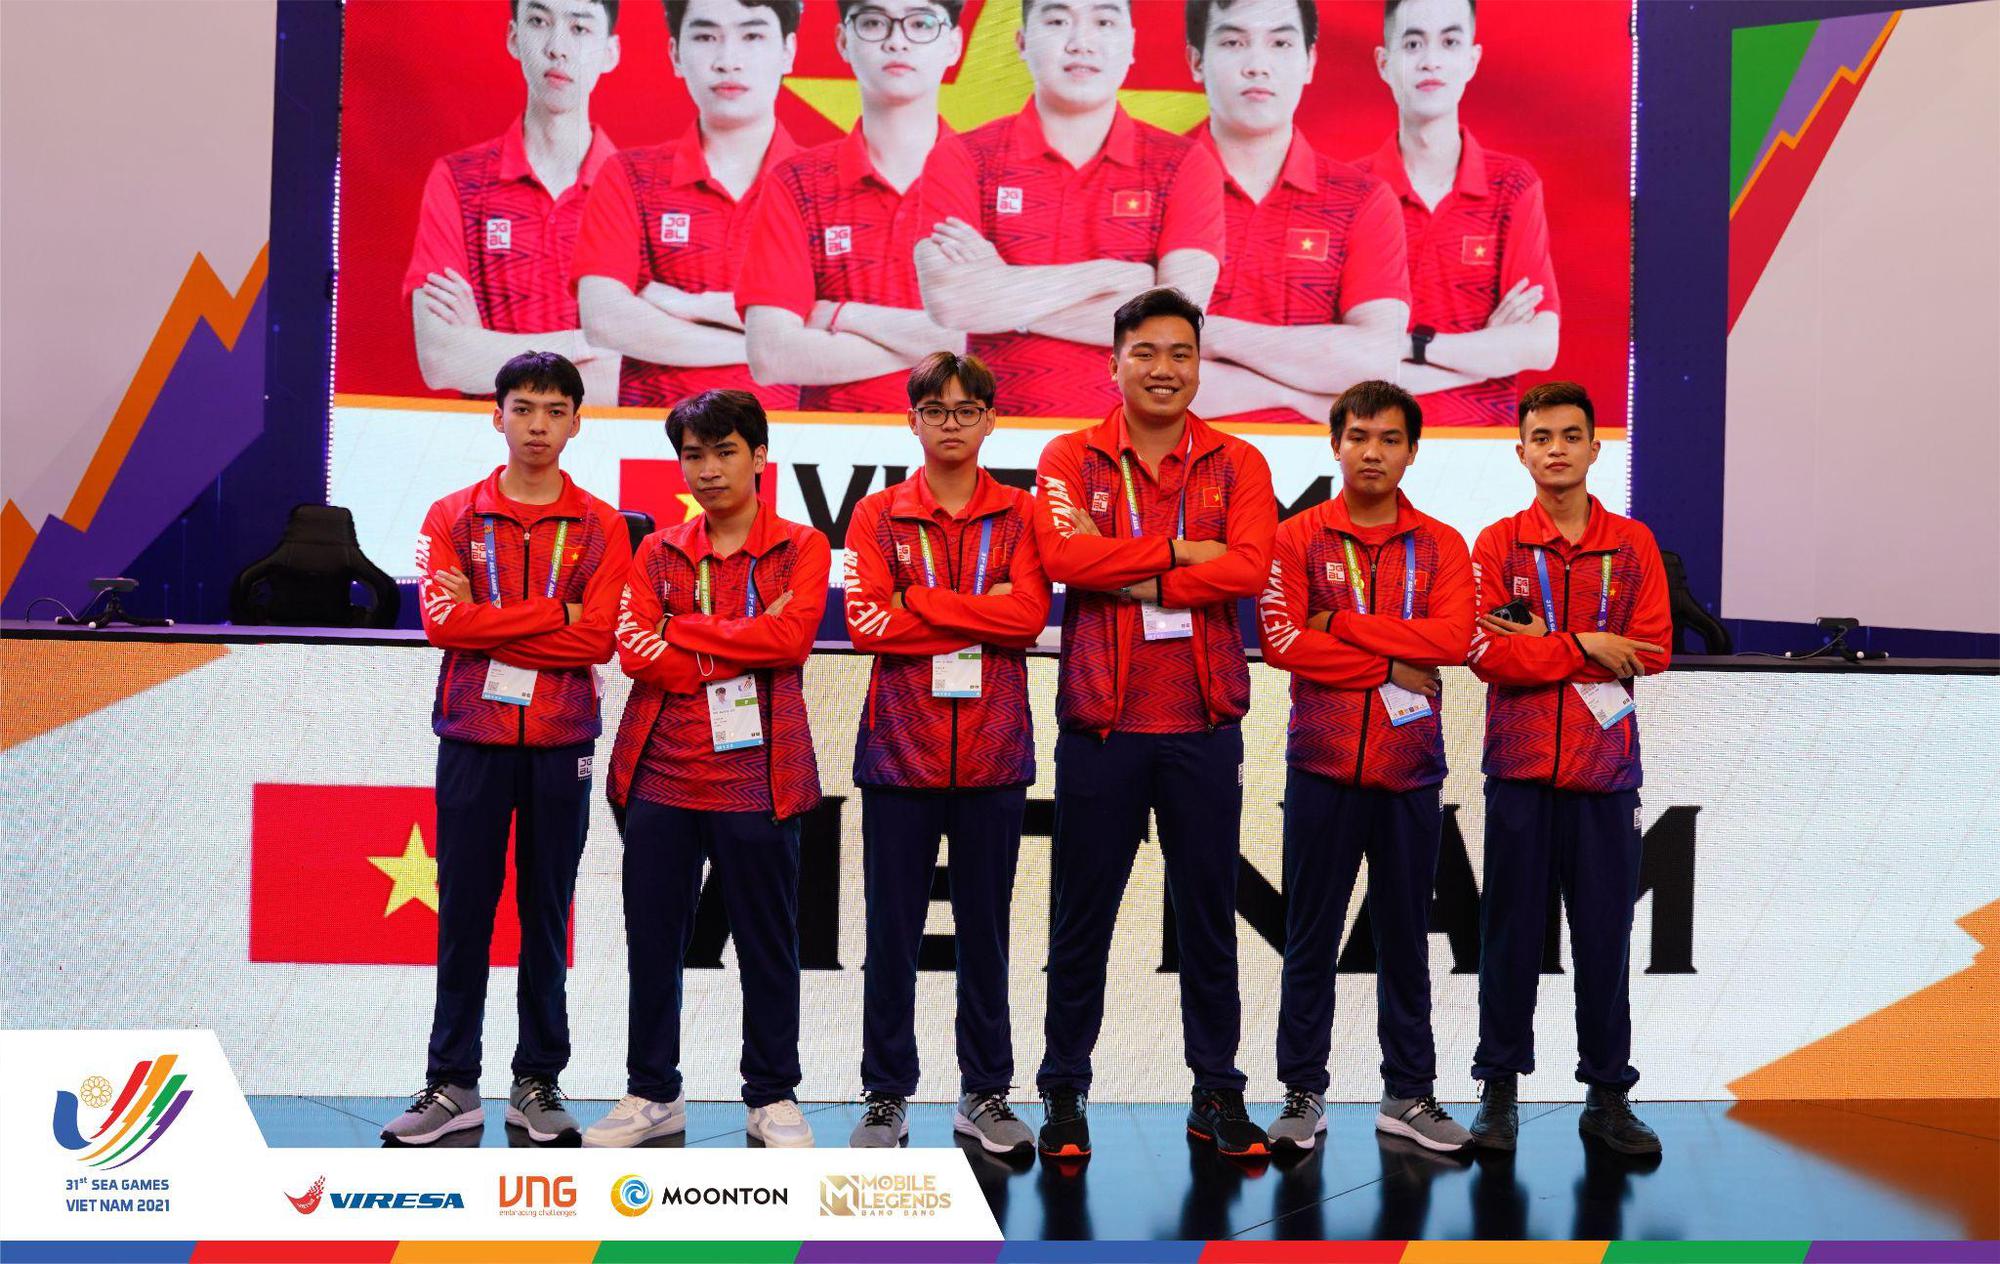 Second day of competition in Mobile Legends: Bang Bang at SEA Games 31: The Vietnamese team stopped, the Philippines and Indonesia met in the final - Photo 1.